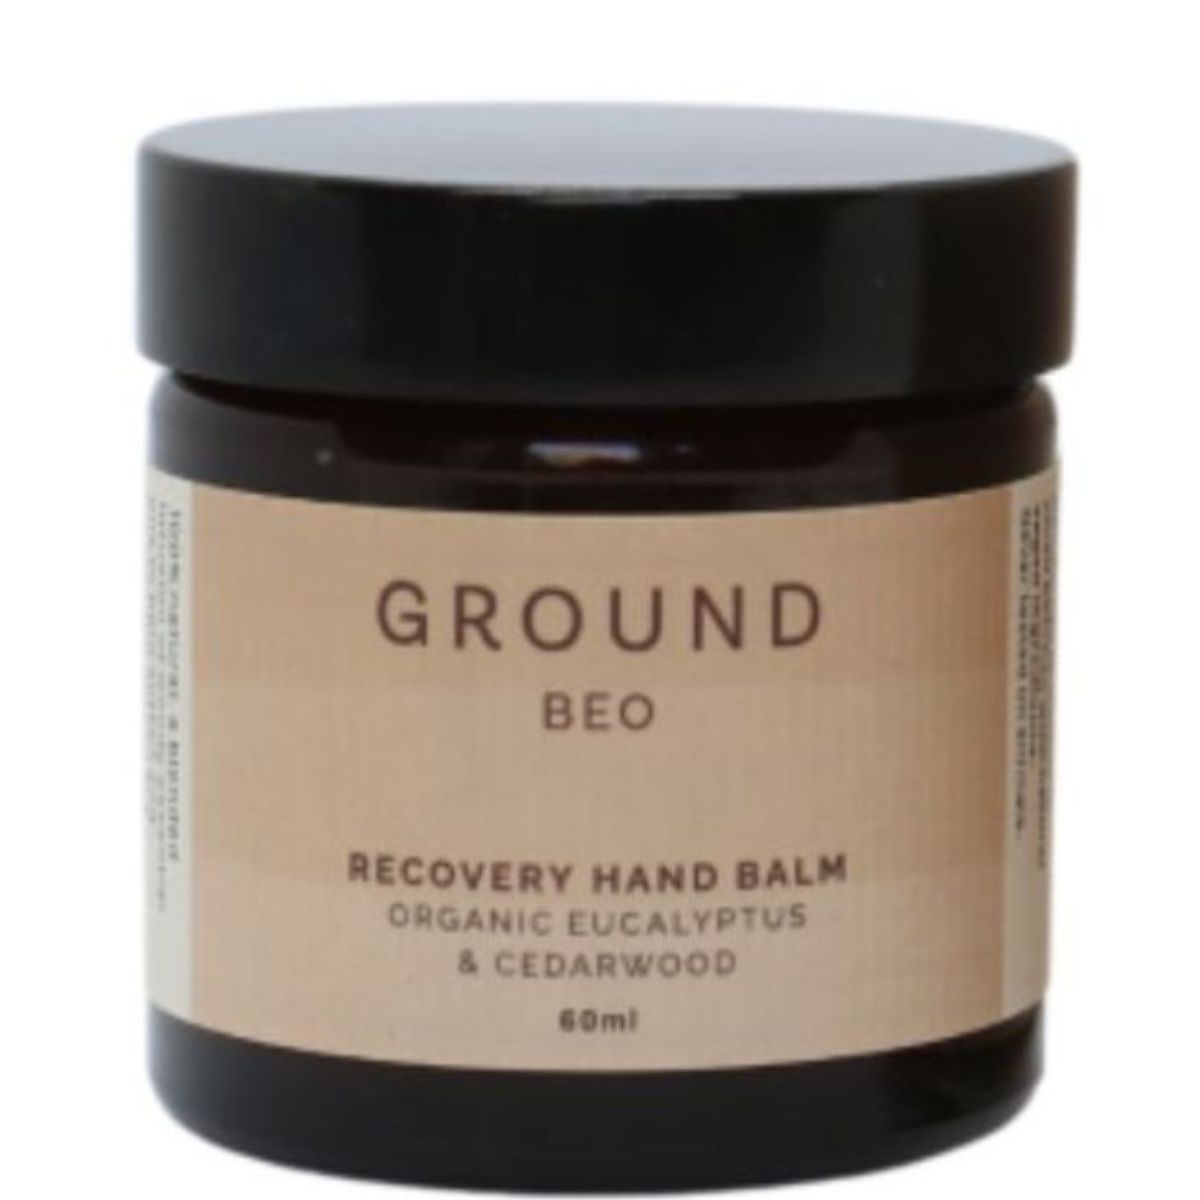 GROUND BEO Recovery Hand Balm